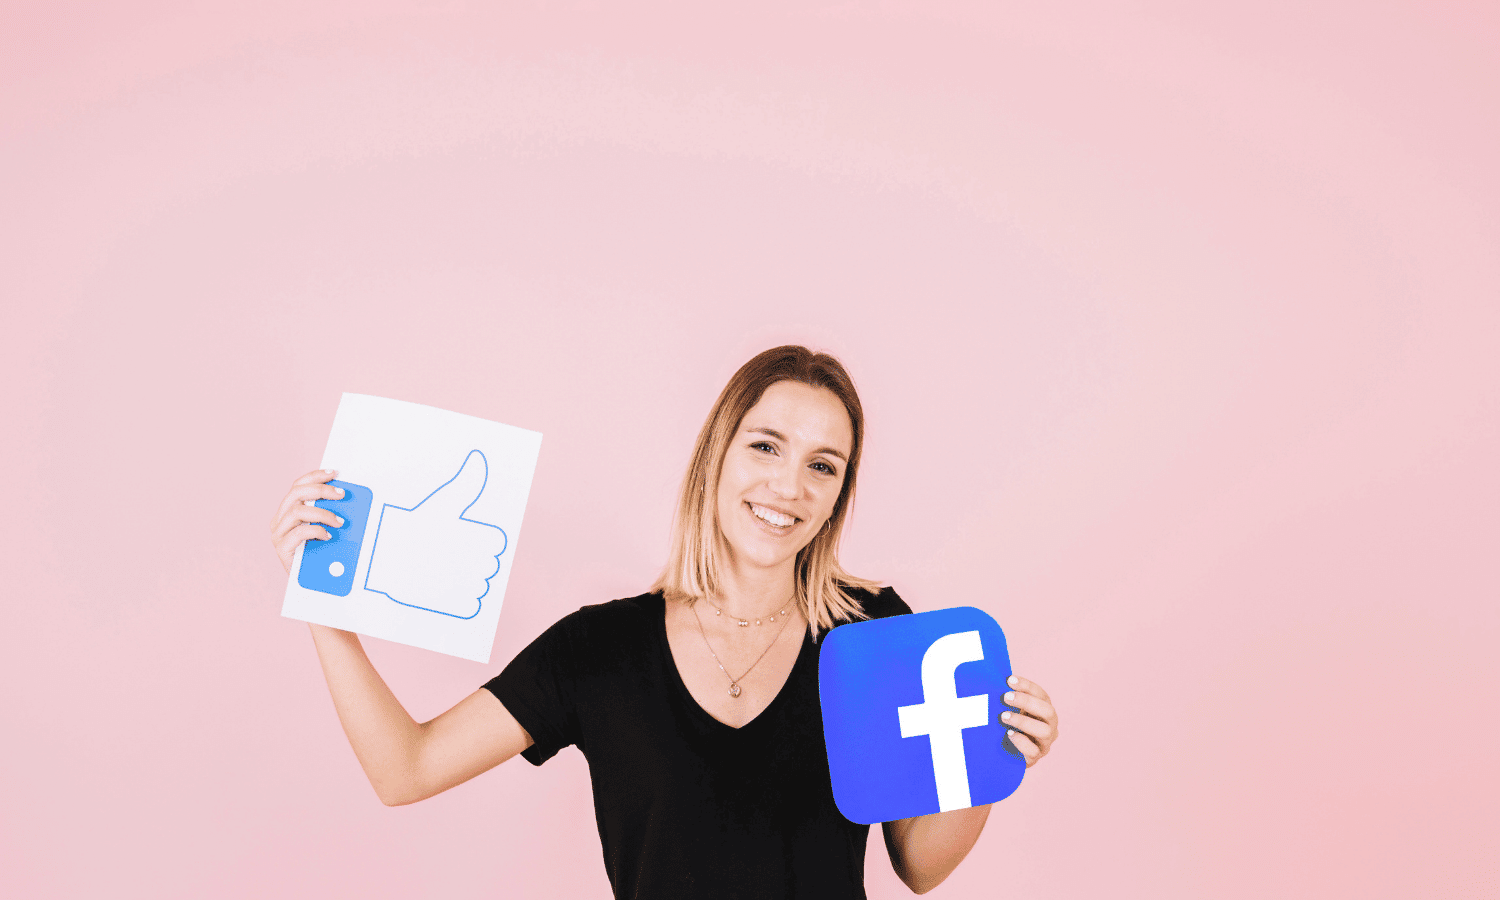 4 NEW Facebook Features You NEED To Know About! - DEAN Knows